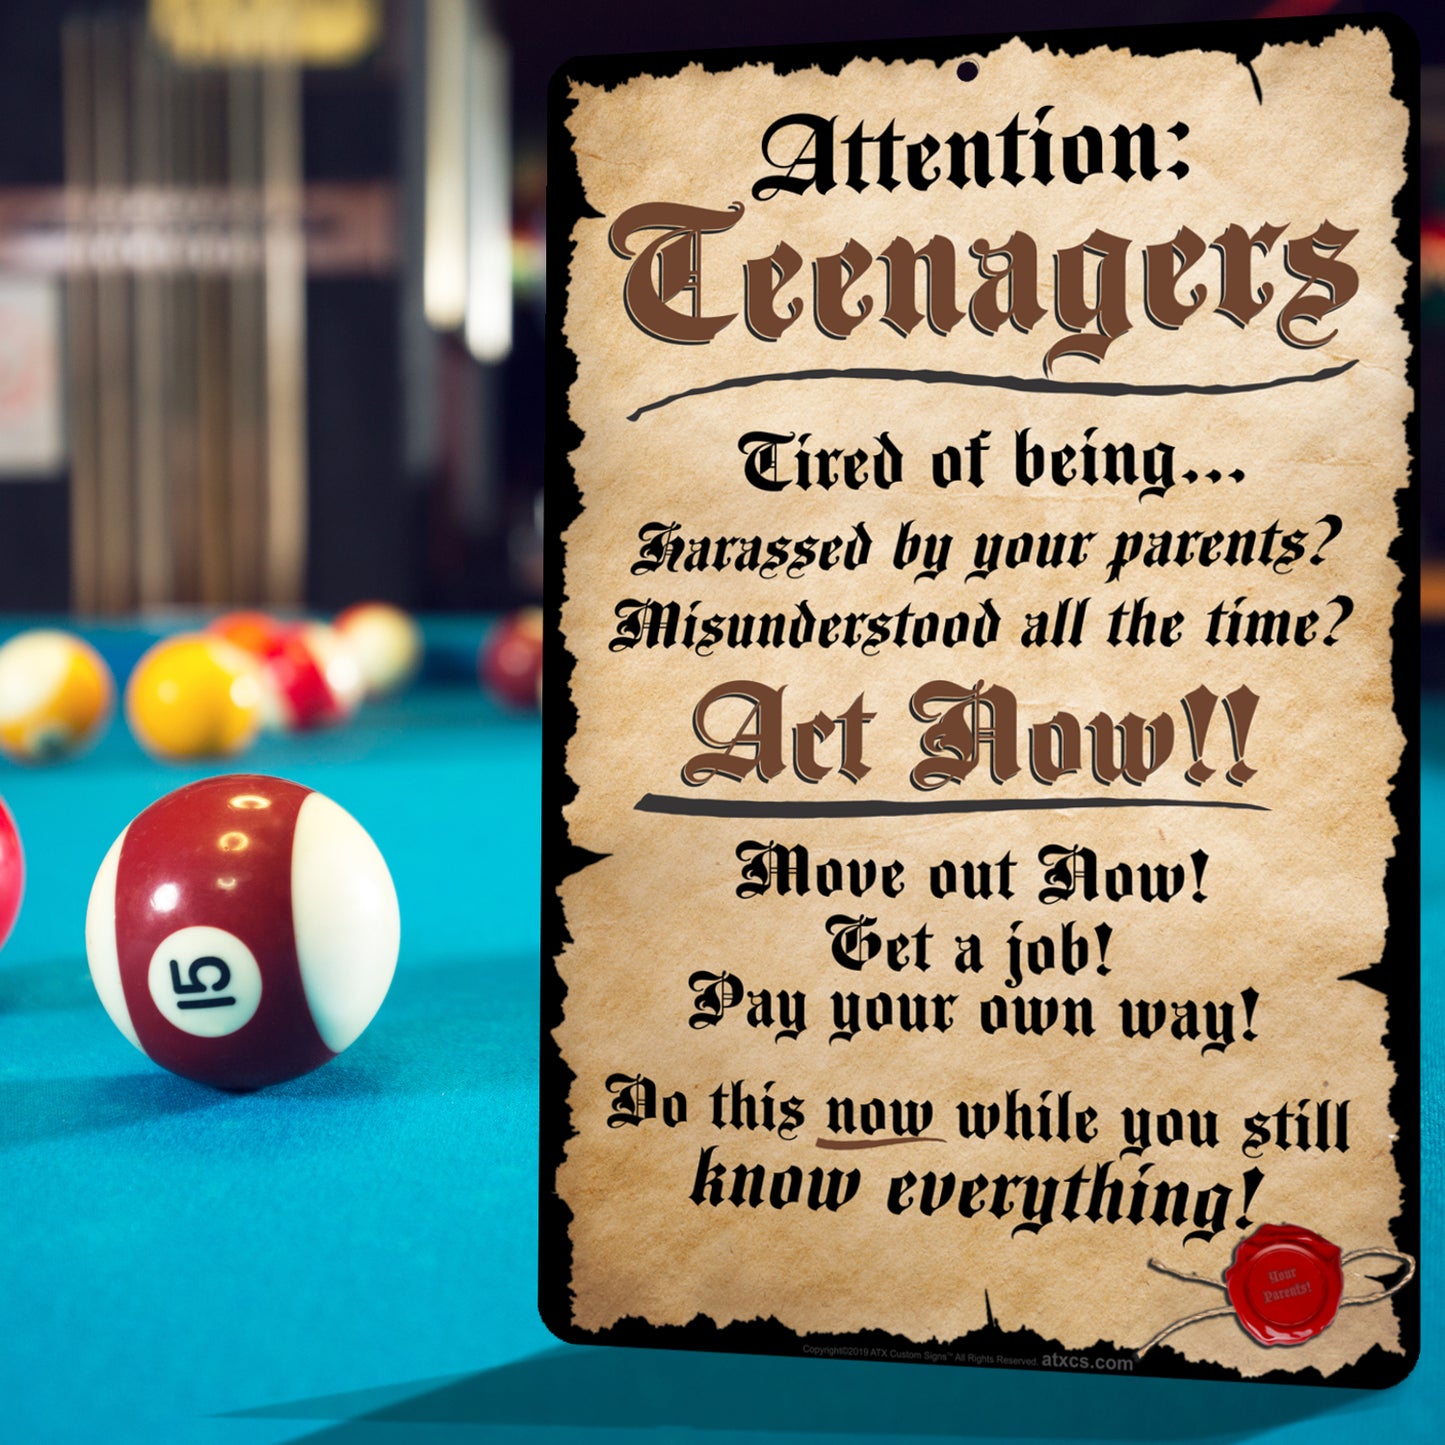 Funny Signs for Home Decor, Attention: Teenagers Tired of being harassed, misunderstood Act Now! - Size 8 x 12